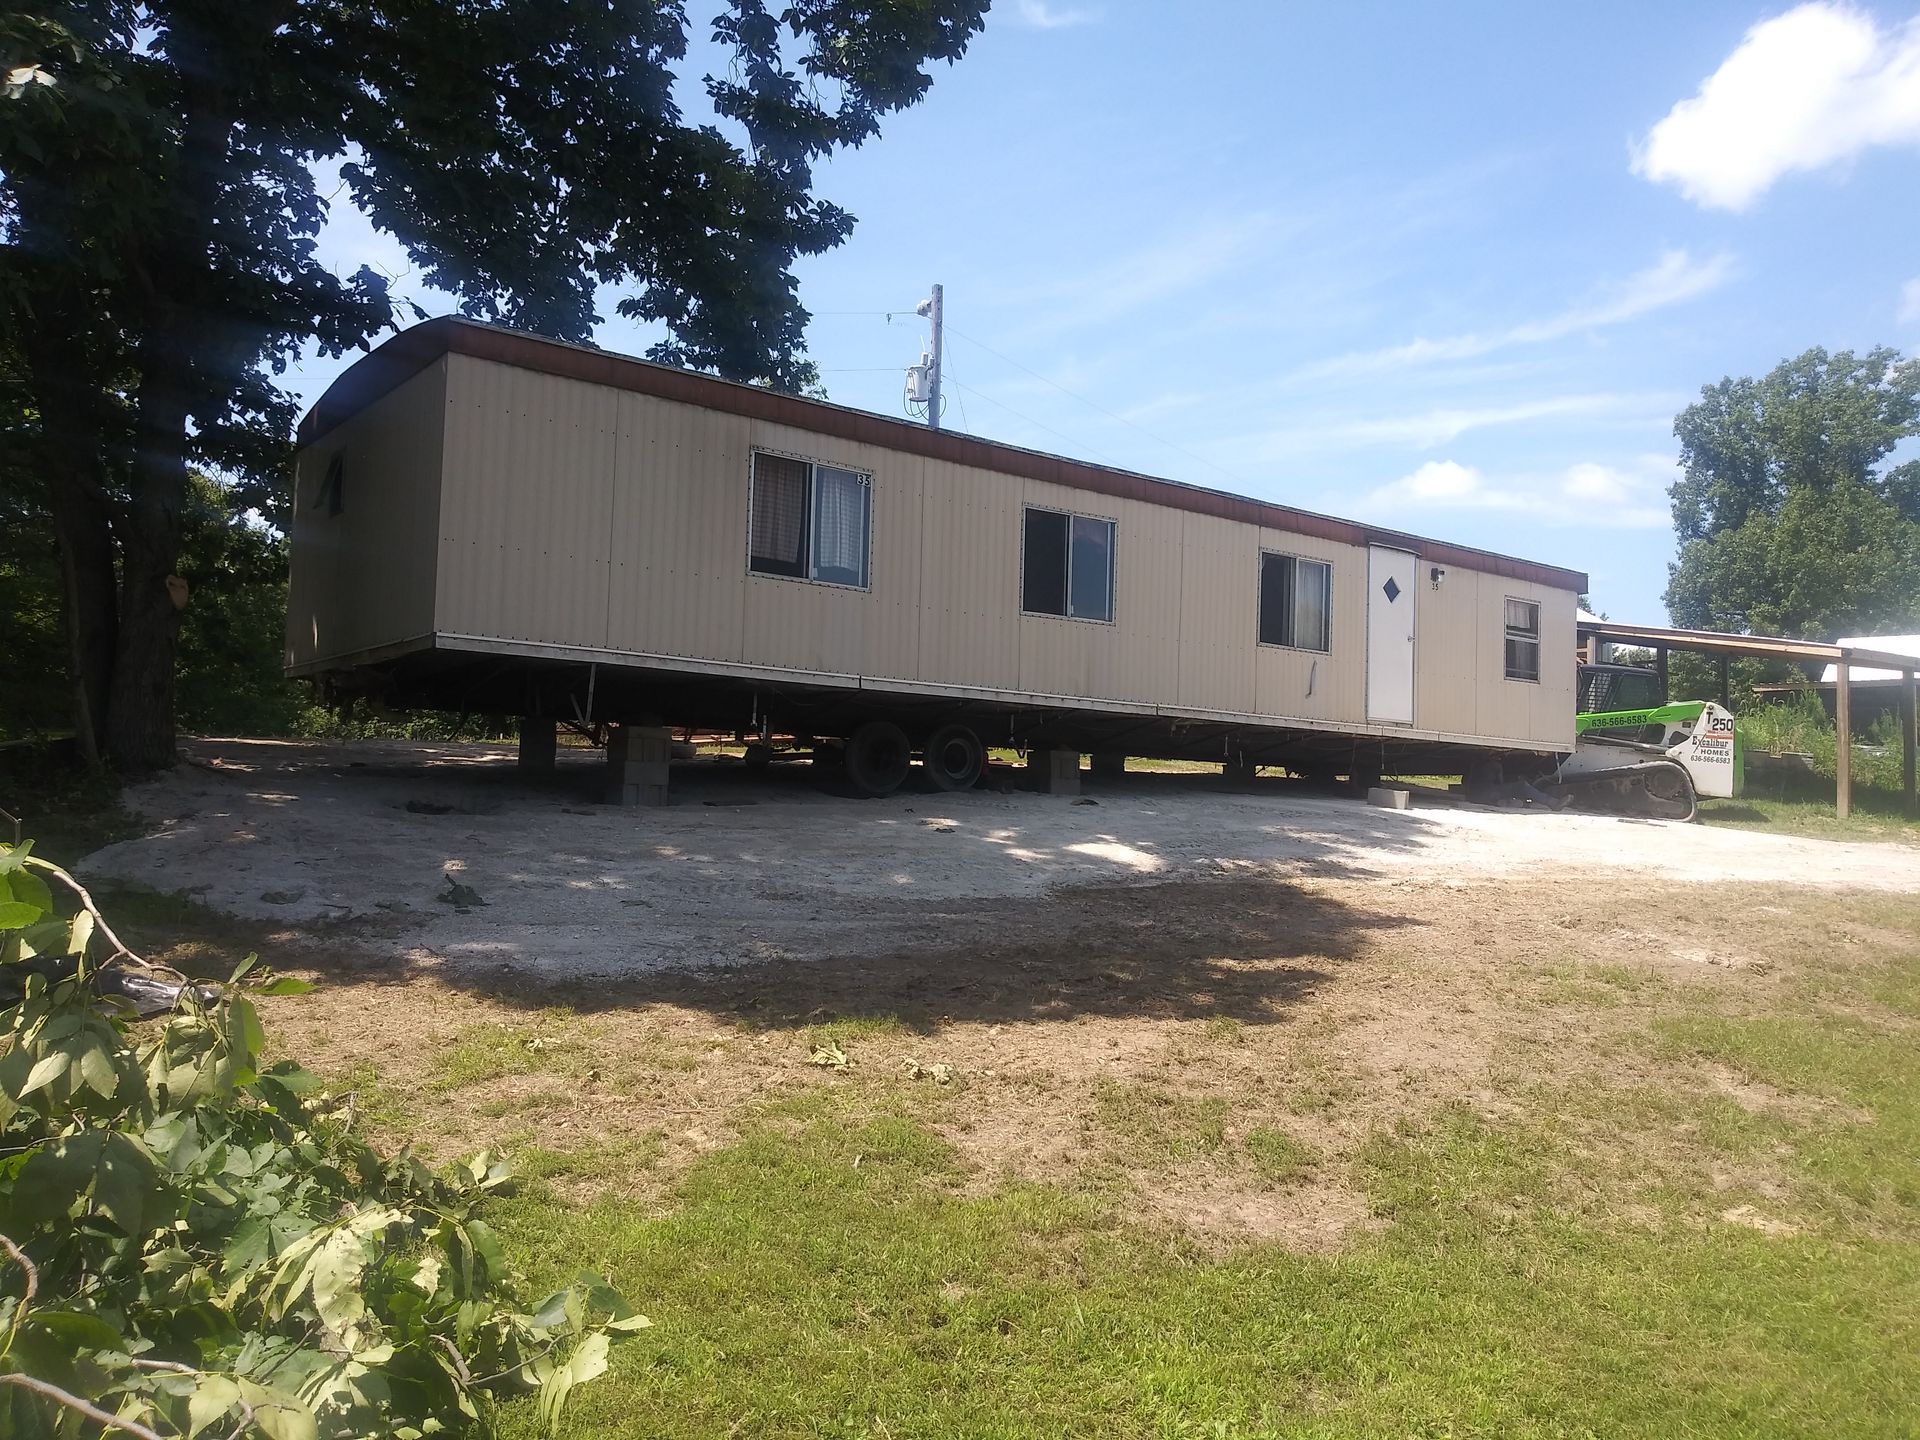 A Mobile Home Is Sitting in The Middle of A Grassy Field | Winfield, MO | Excalibur Manufactured Housing Services LLC